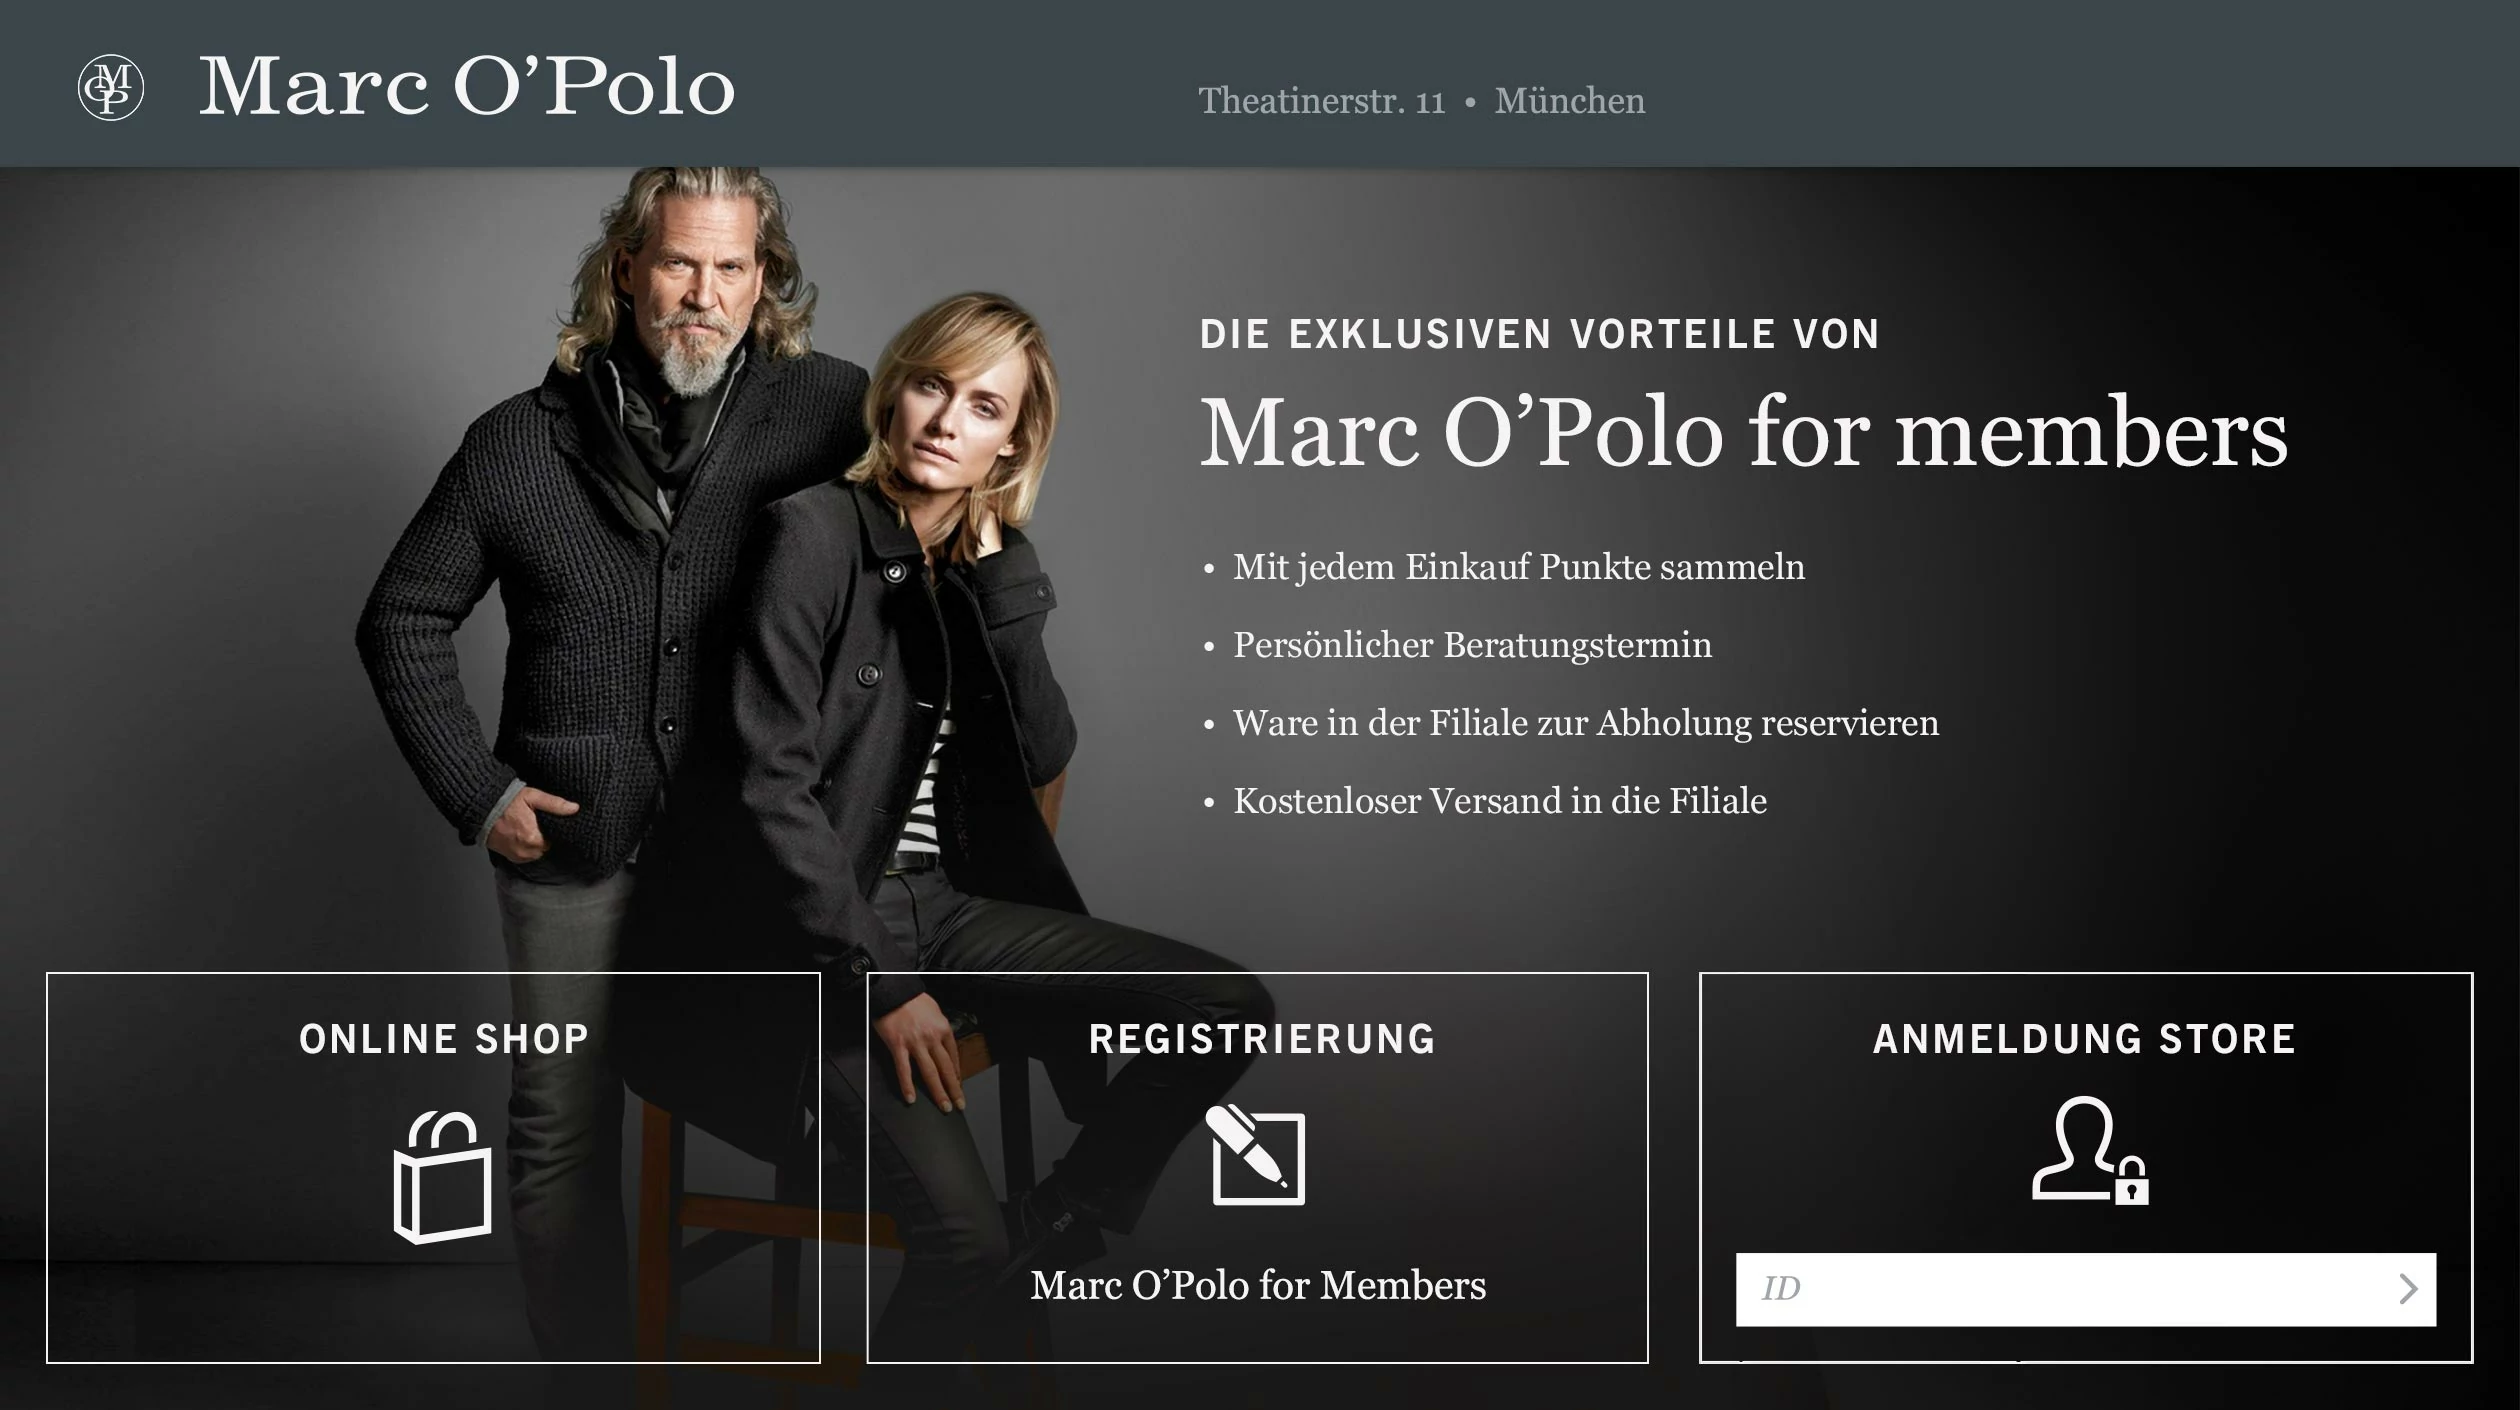 Home page of the seller app with login and registration. The background image shows Jeff Bridges and Uma Thurman.